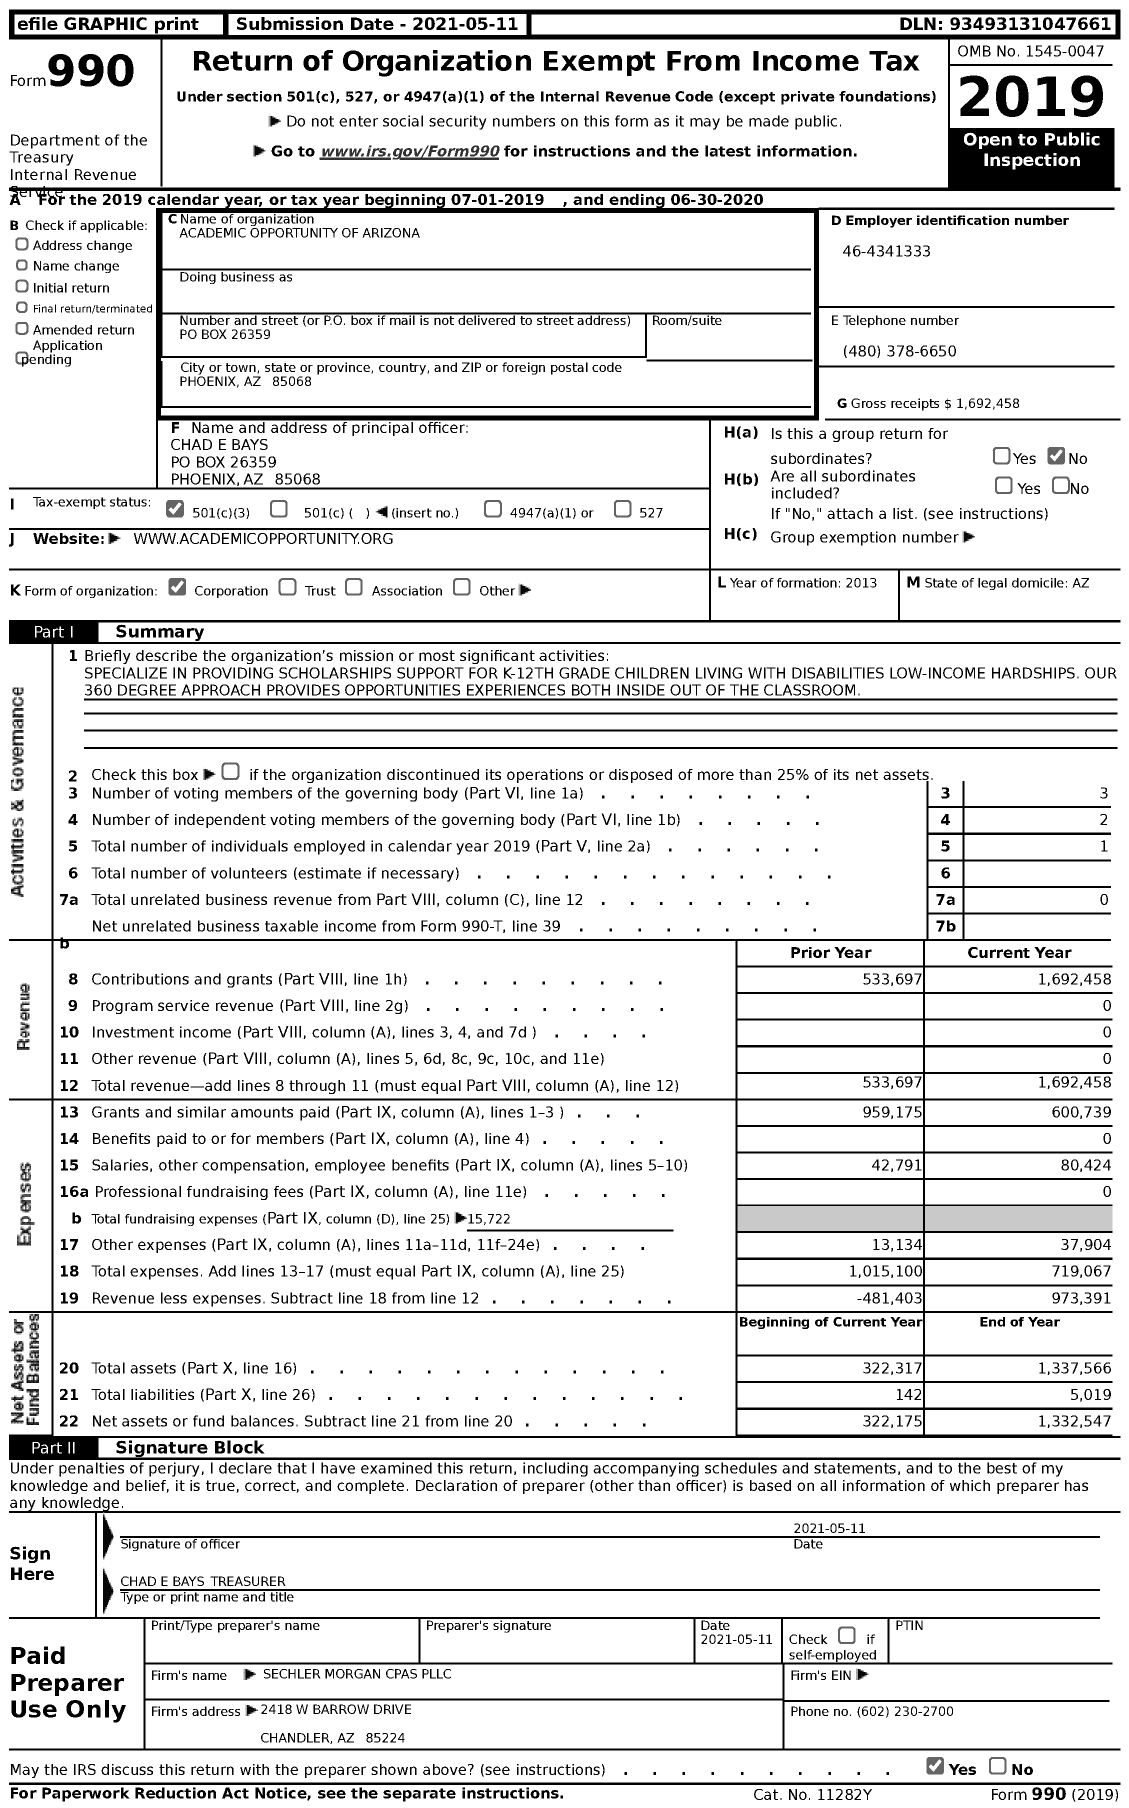 Image of first page of 2019 Form 990 for Academic Opportunity of Arizona